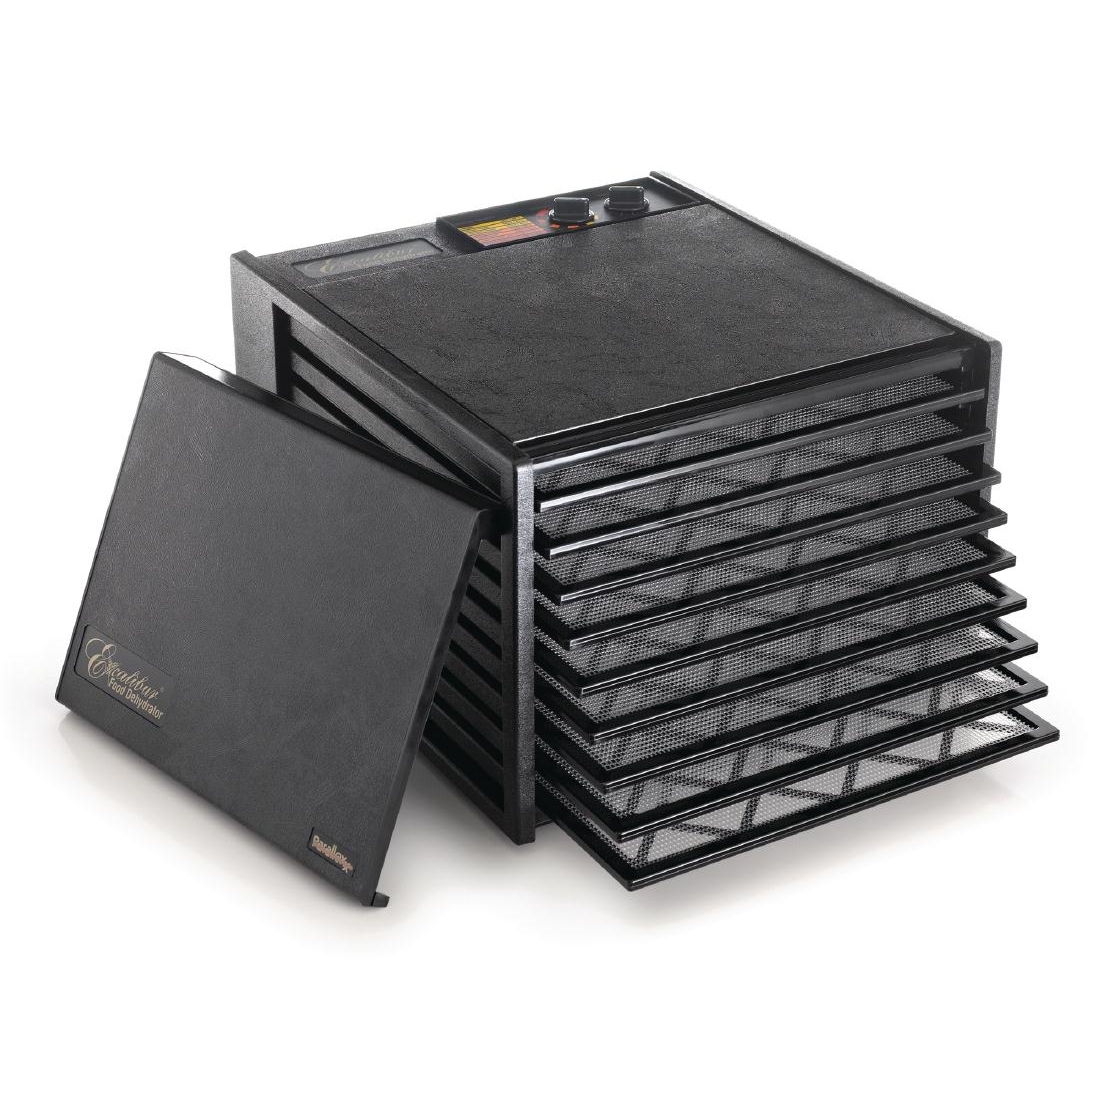 Excalibur 9 Tray Black Dehydrator with Timer 4926TB